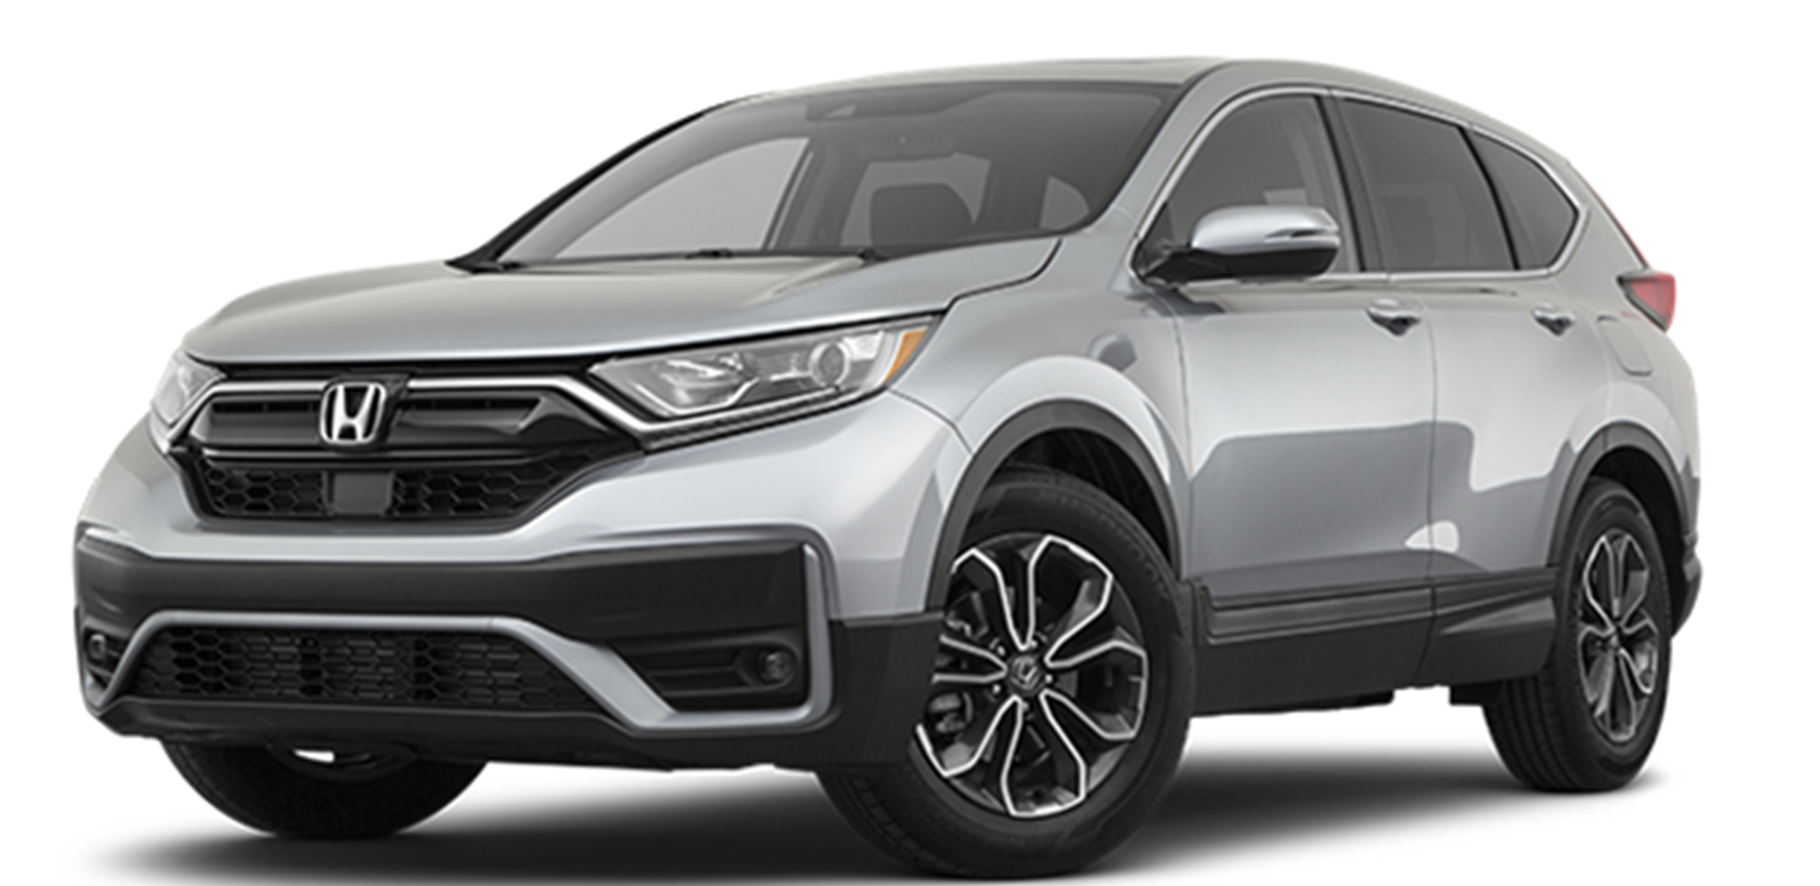 Welcome to the style, elegance and versatility of the Honda CR-V 2022